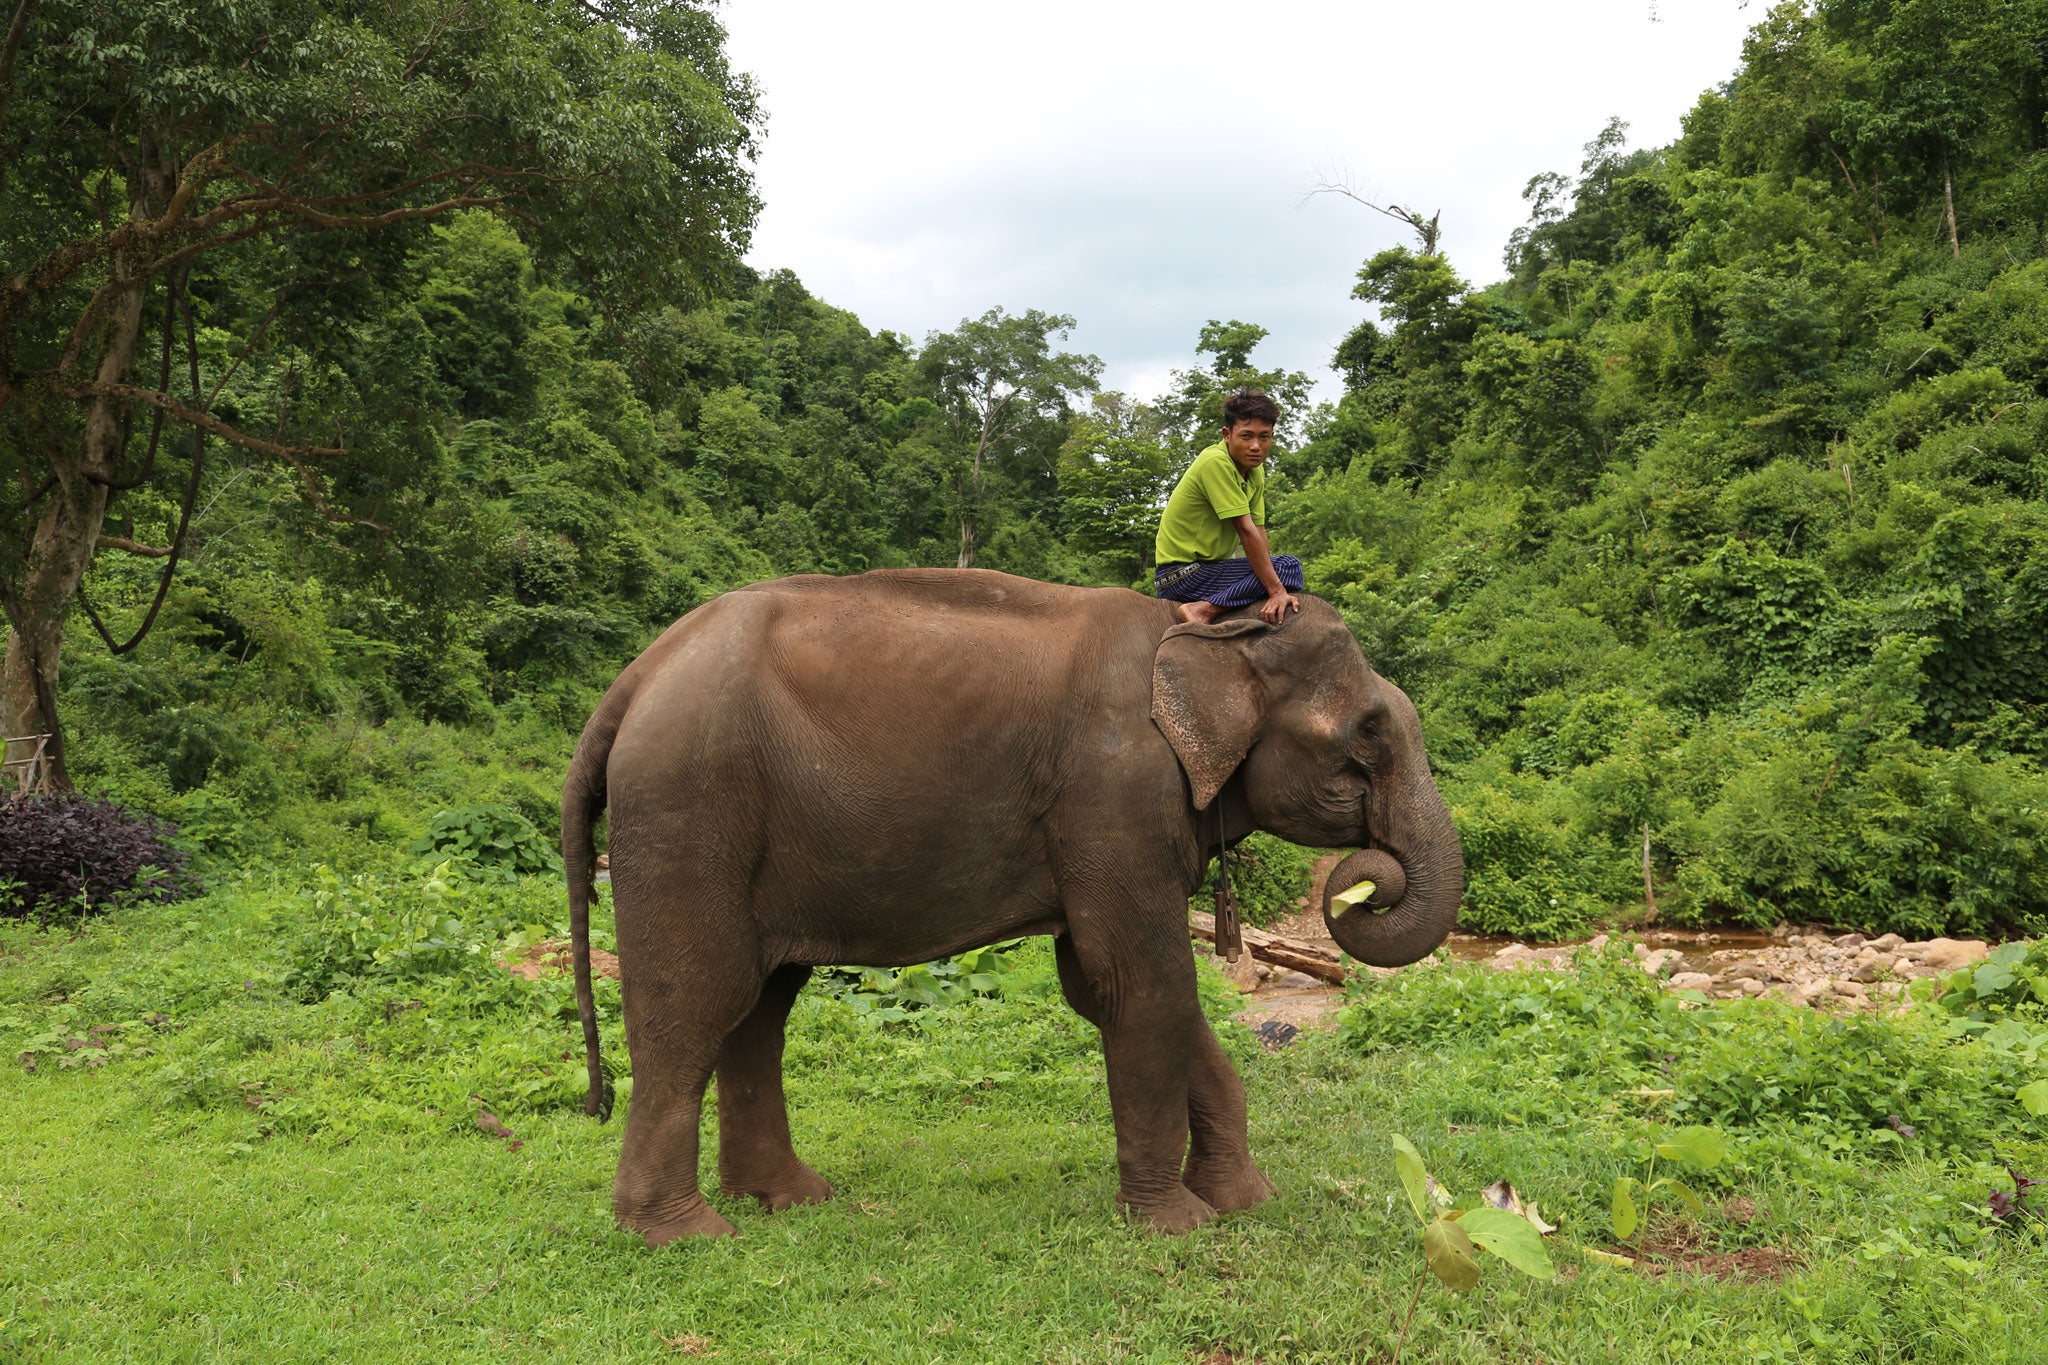 Green Hill Valley is a sanctuary for elephants formally used in the logging industry